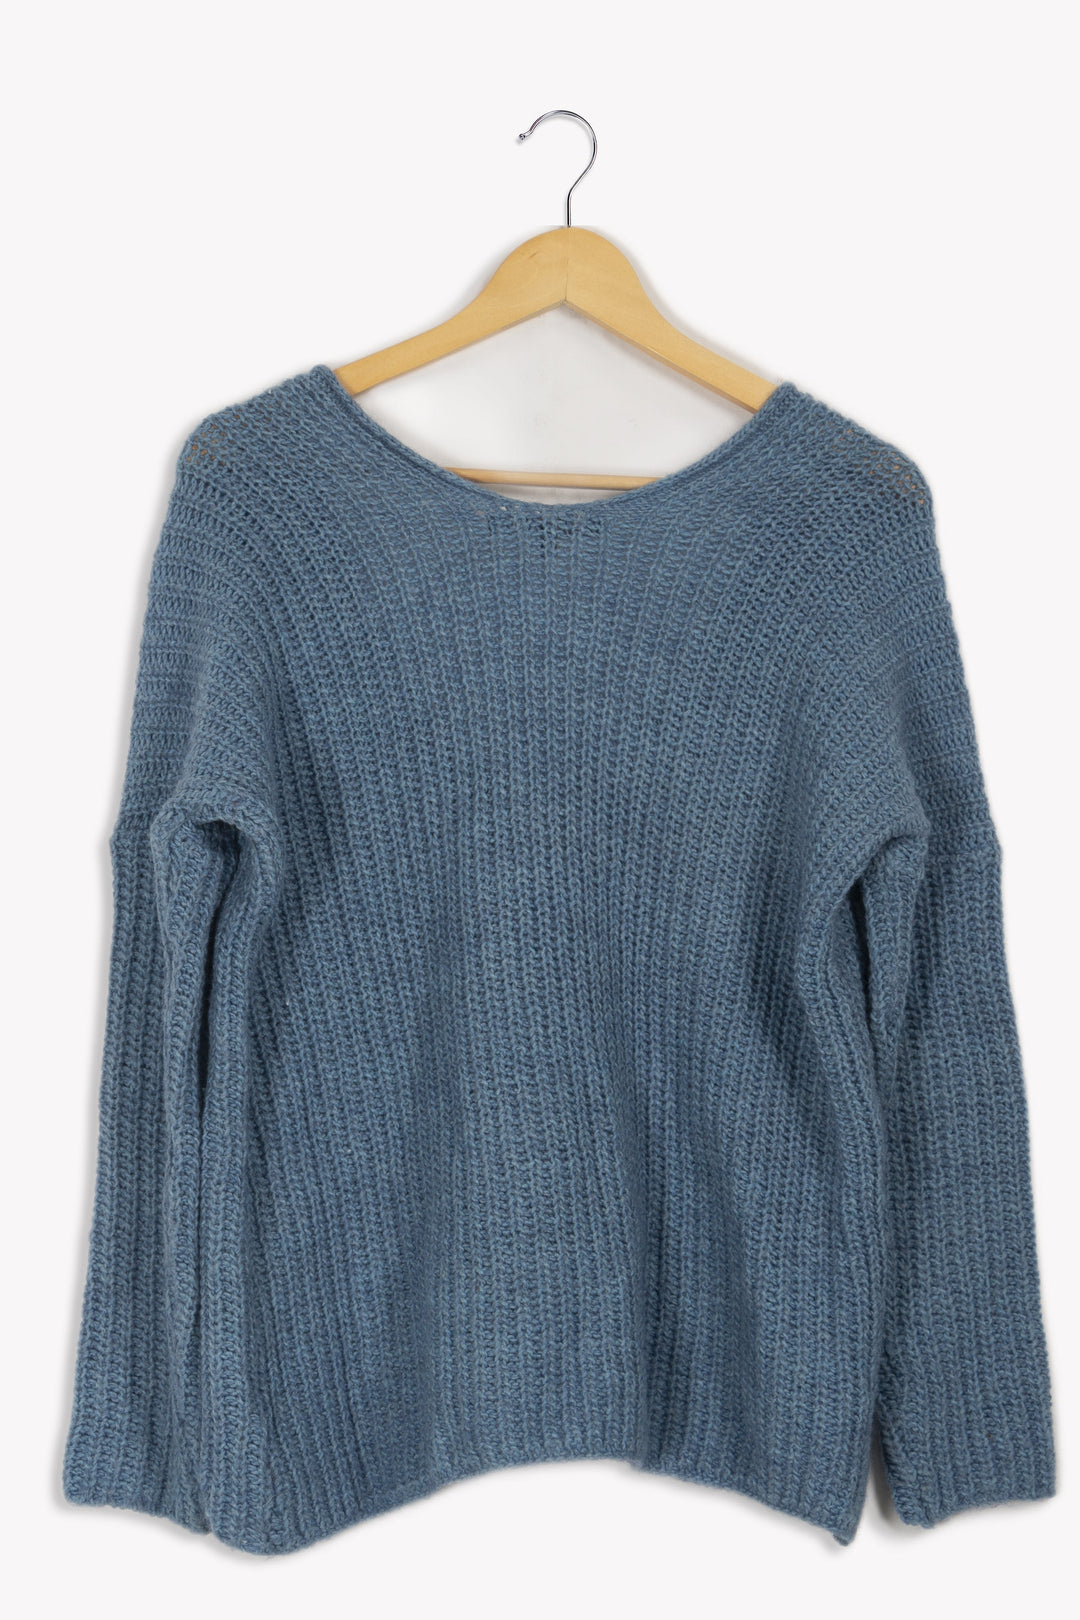 Pull bleu - Taille T1